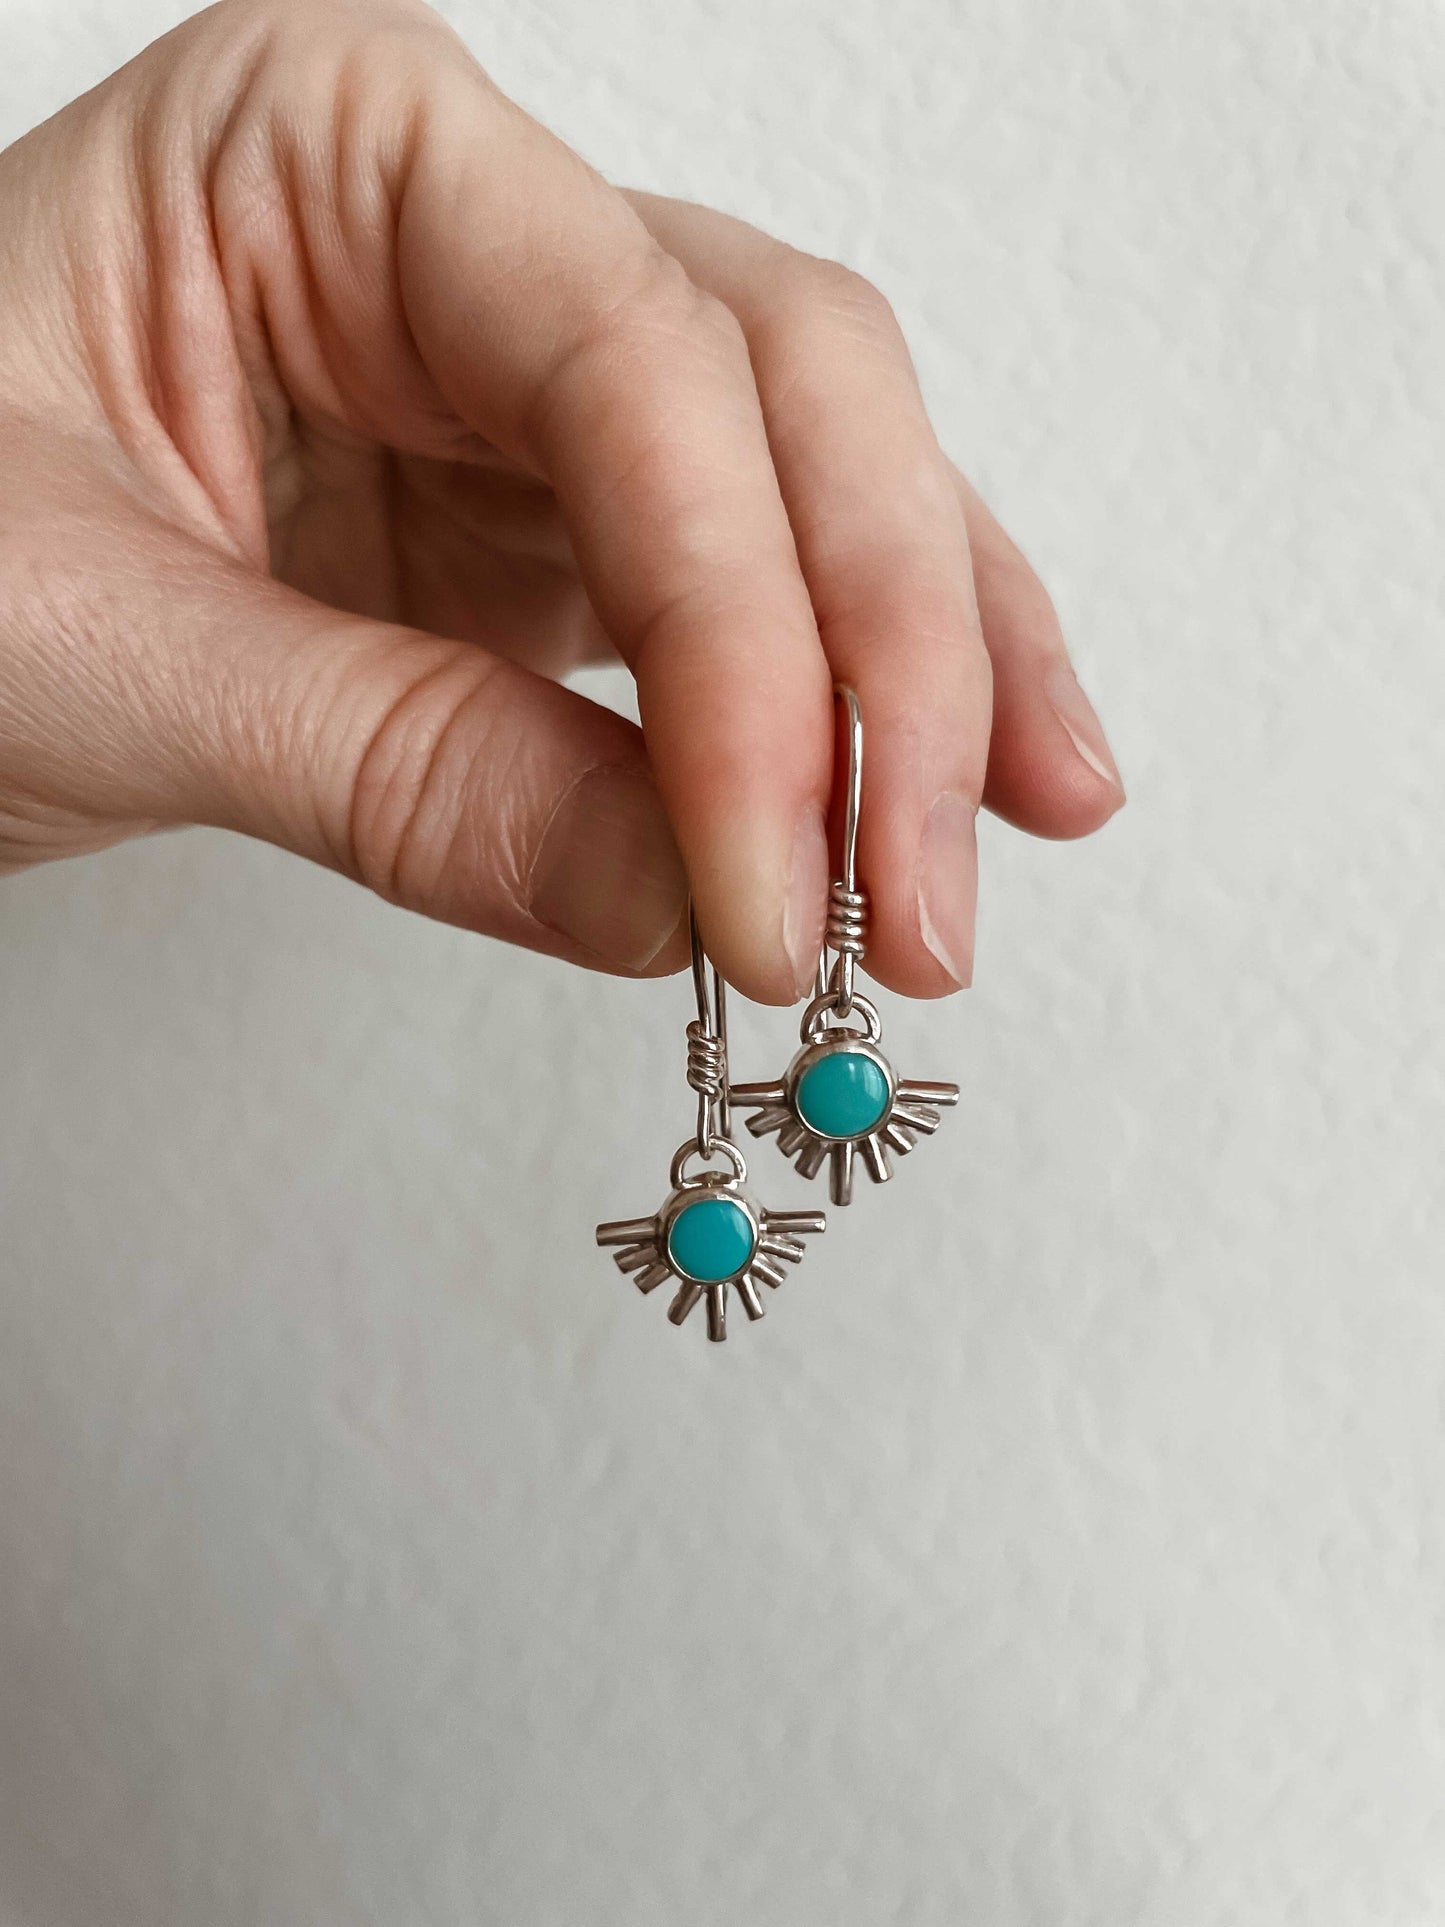 Sterling silver starburst turquoise drop earrings held in hand against white wall.